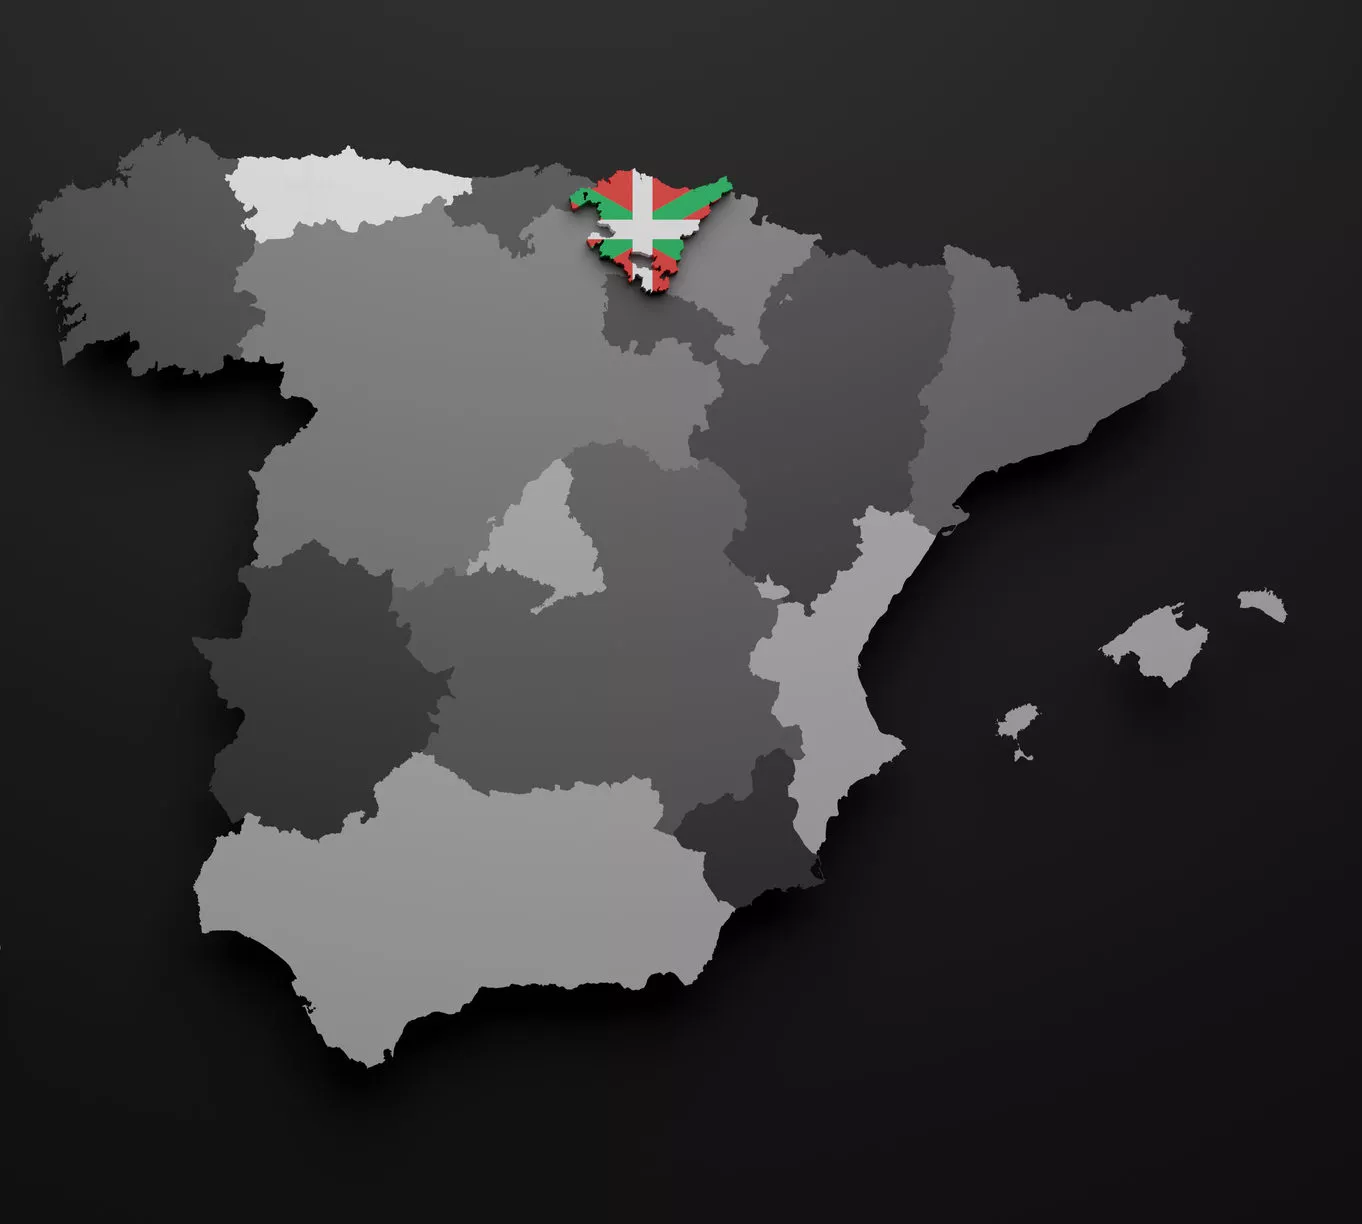 What is Basque? Basque Country community in modern Spain